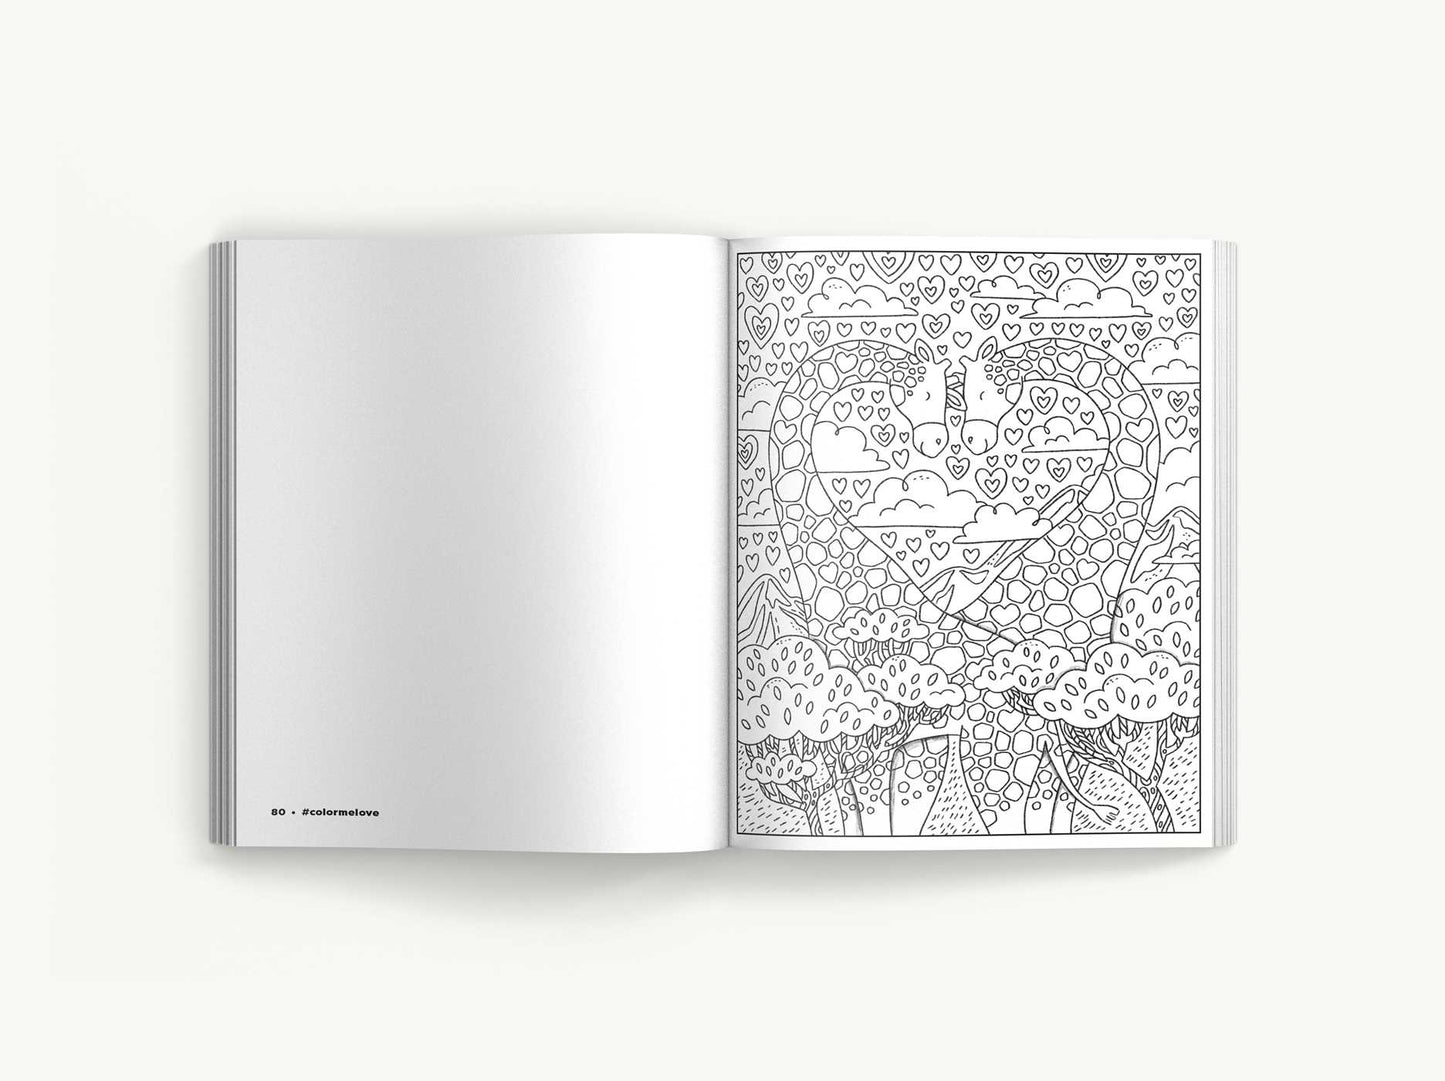 Color Me Love: A Valentine's Day Coloring Book